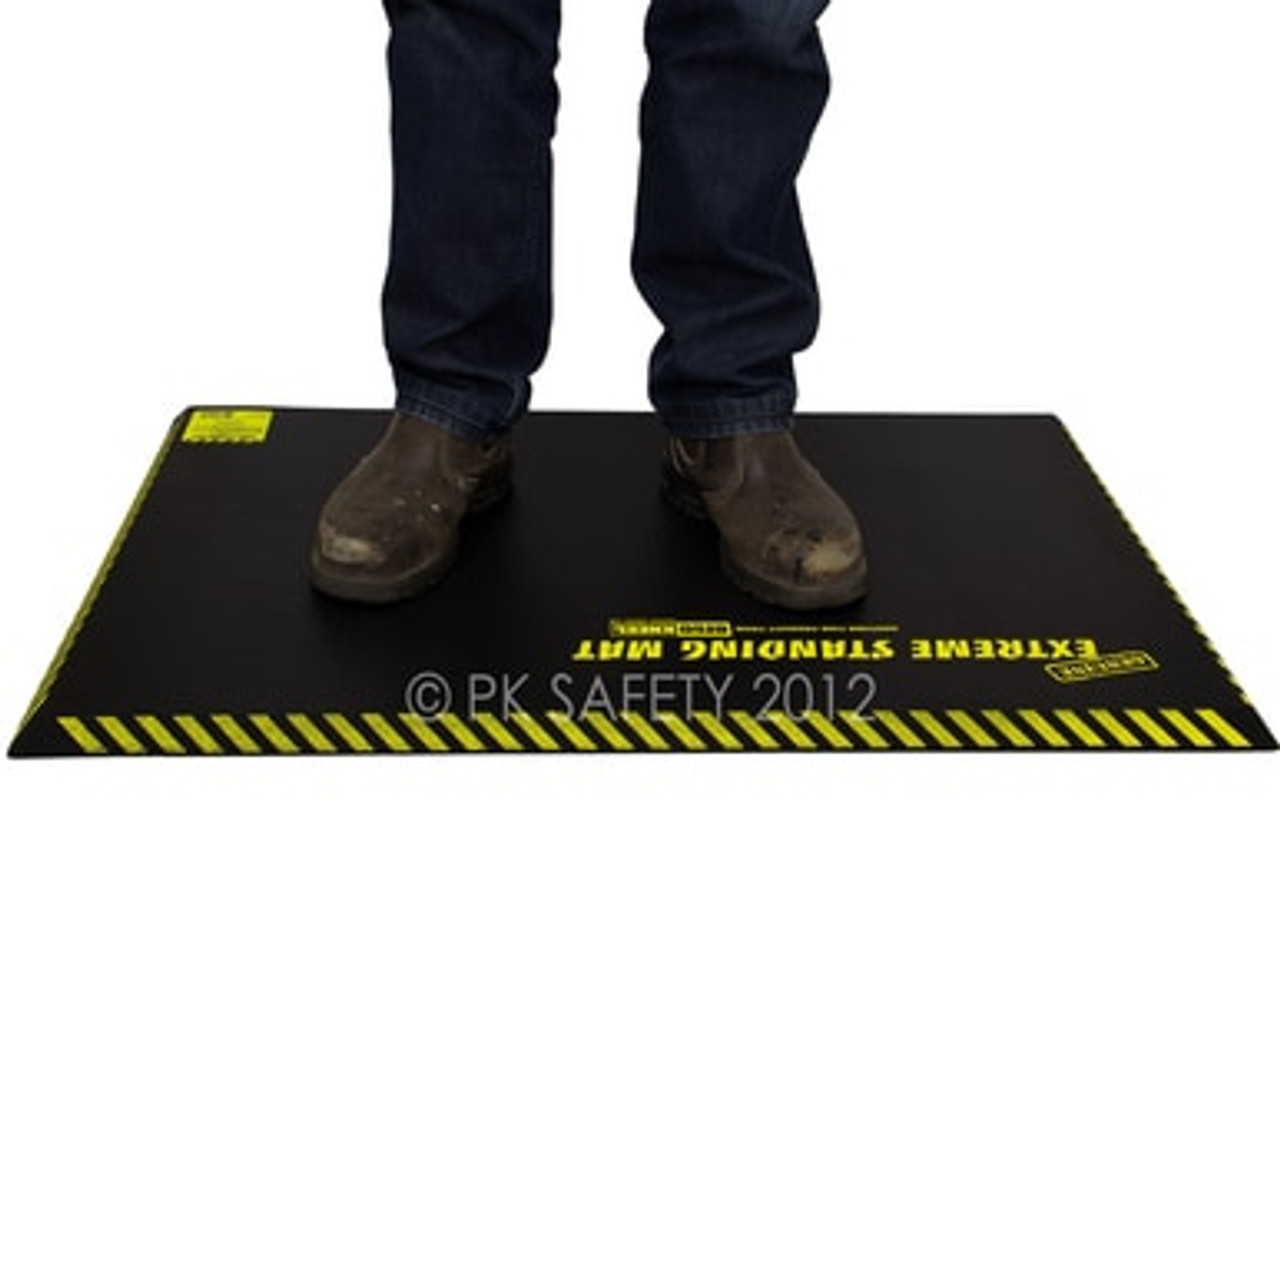 Get Fit Stand Up Anti-Fatigue Floor Mat